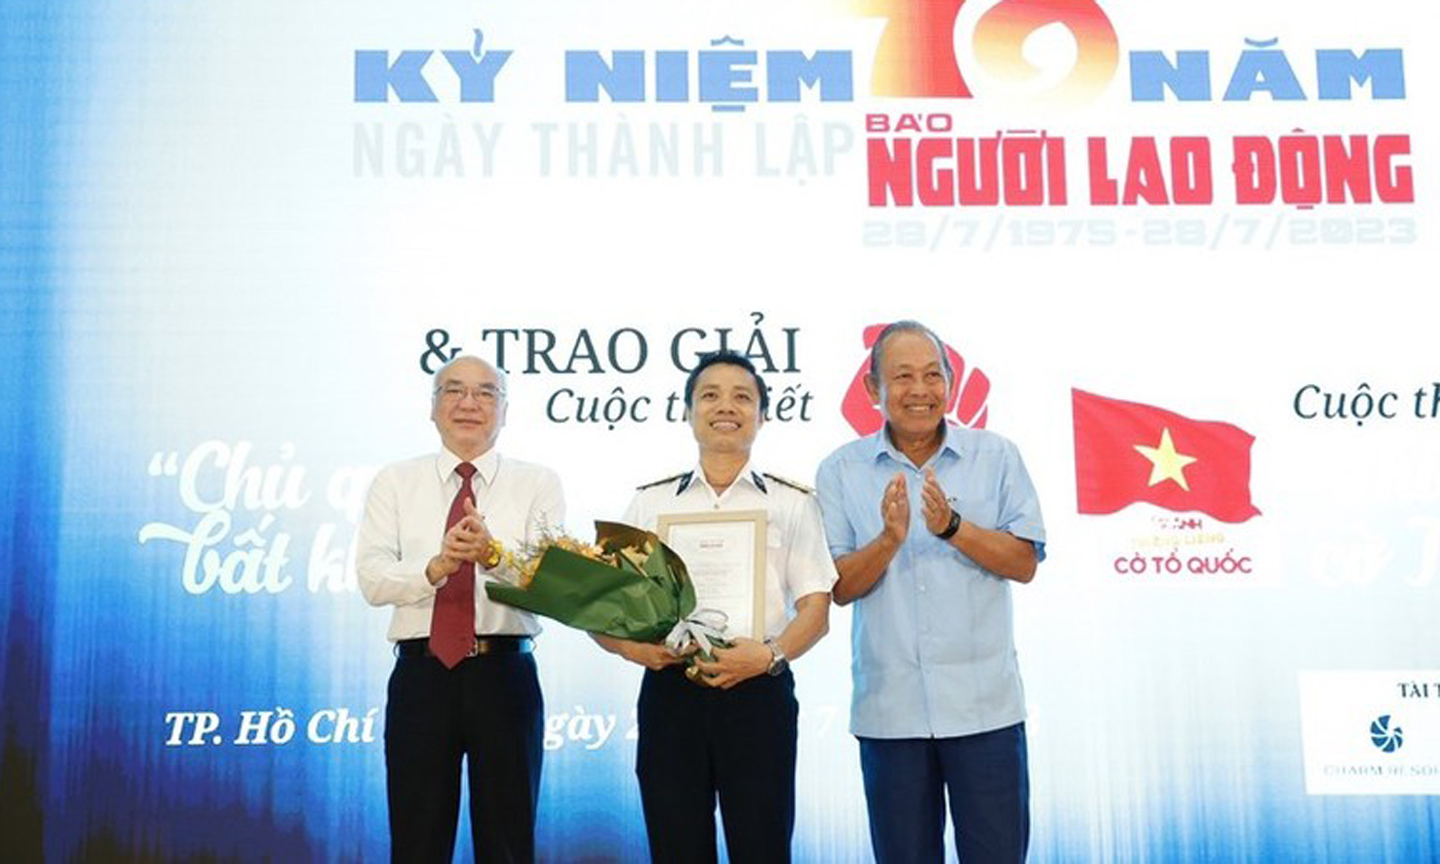 Hoang Long from Ba Ria – Vung Tau province wins first prize of the writing contest (Photo: plo.vn).